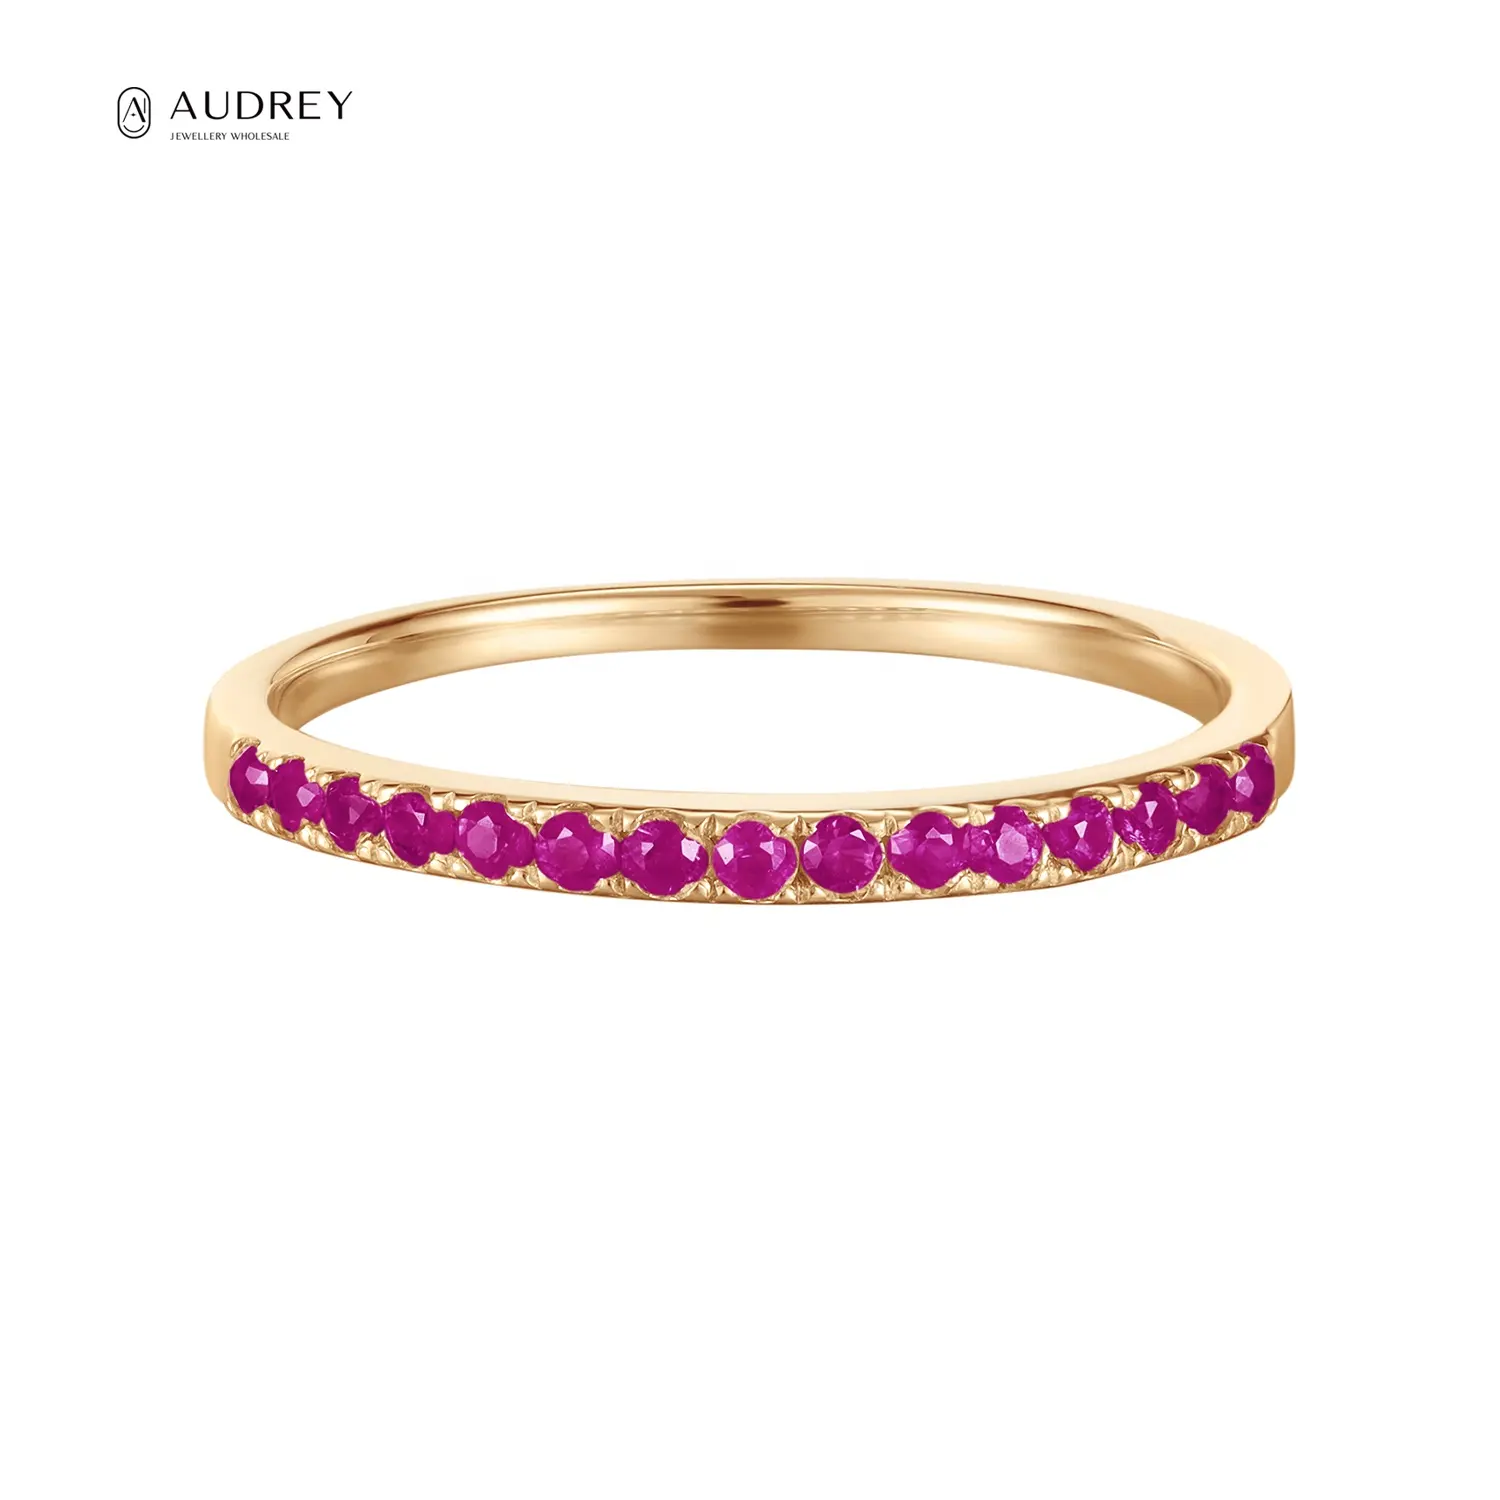 Audrey Fine Jewelry Custom Gemstone Ring Solid 14k Yellow Gold Engagement Wedding Natural Ruby Stone Rings For Women